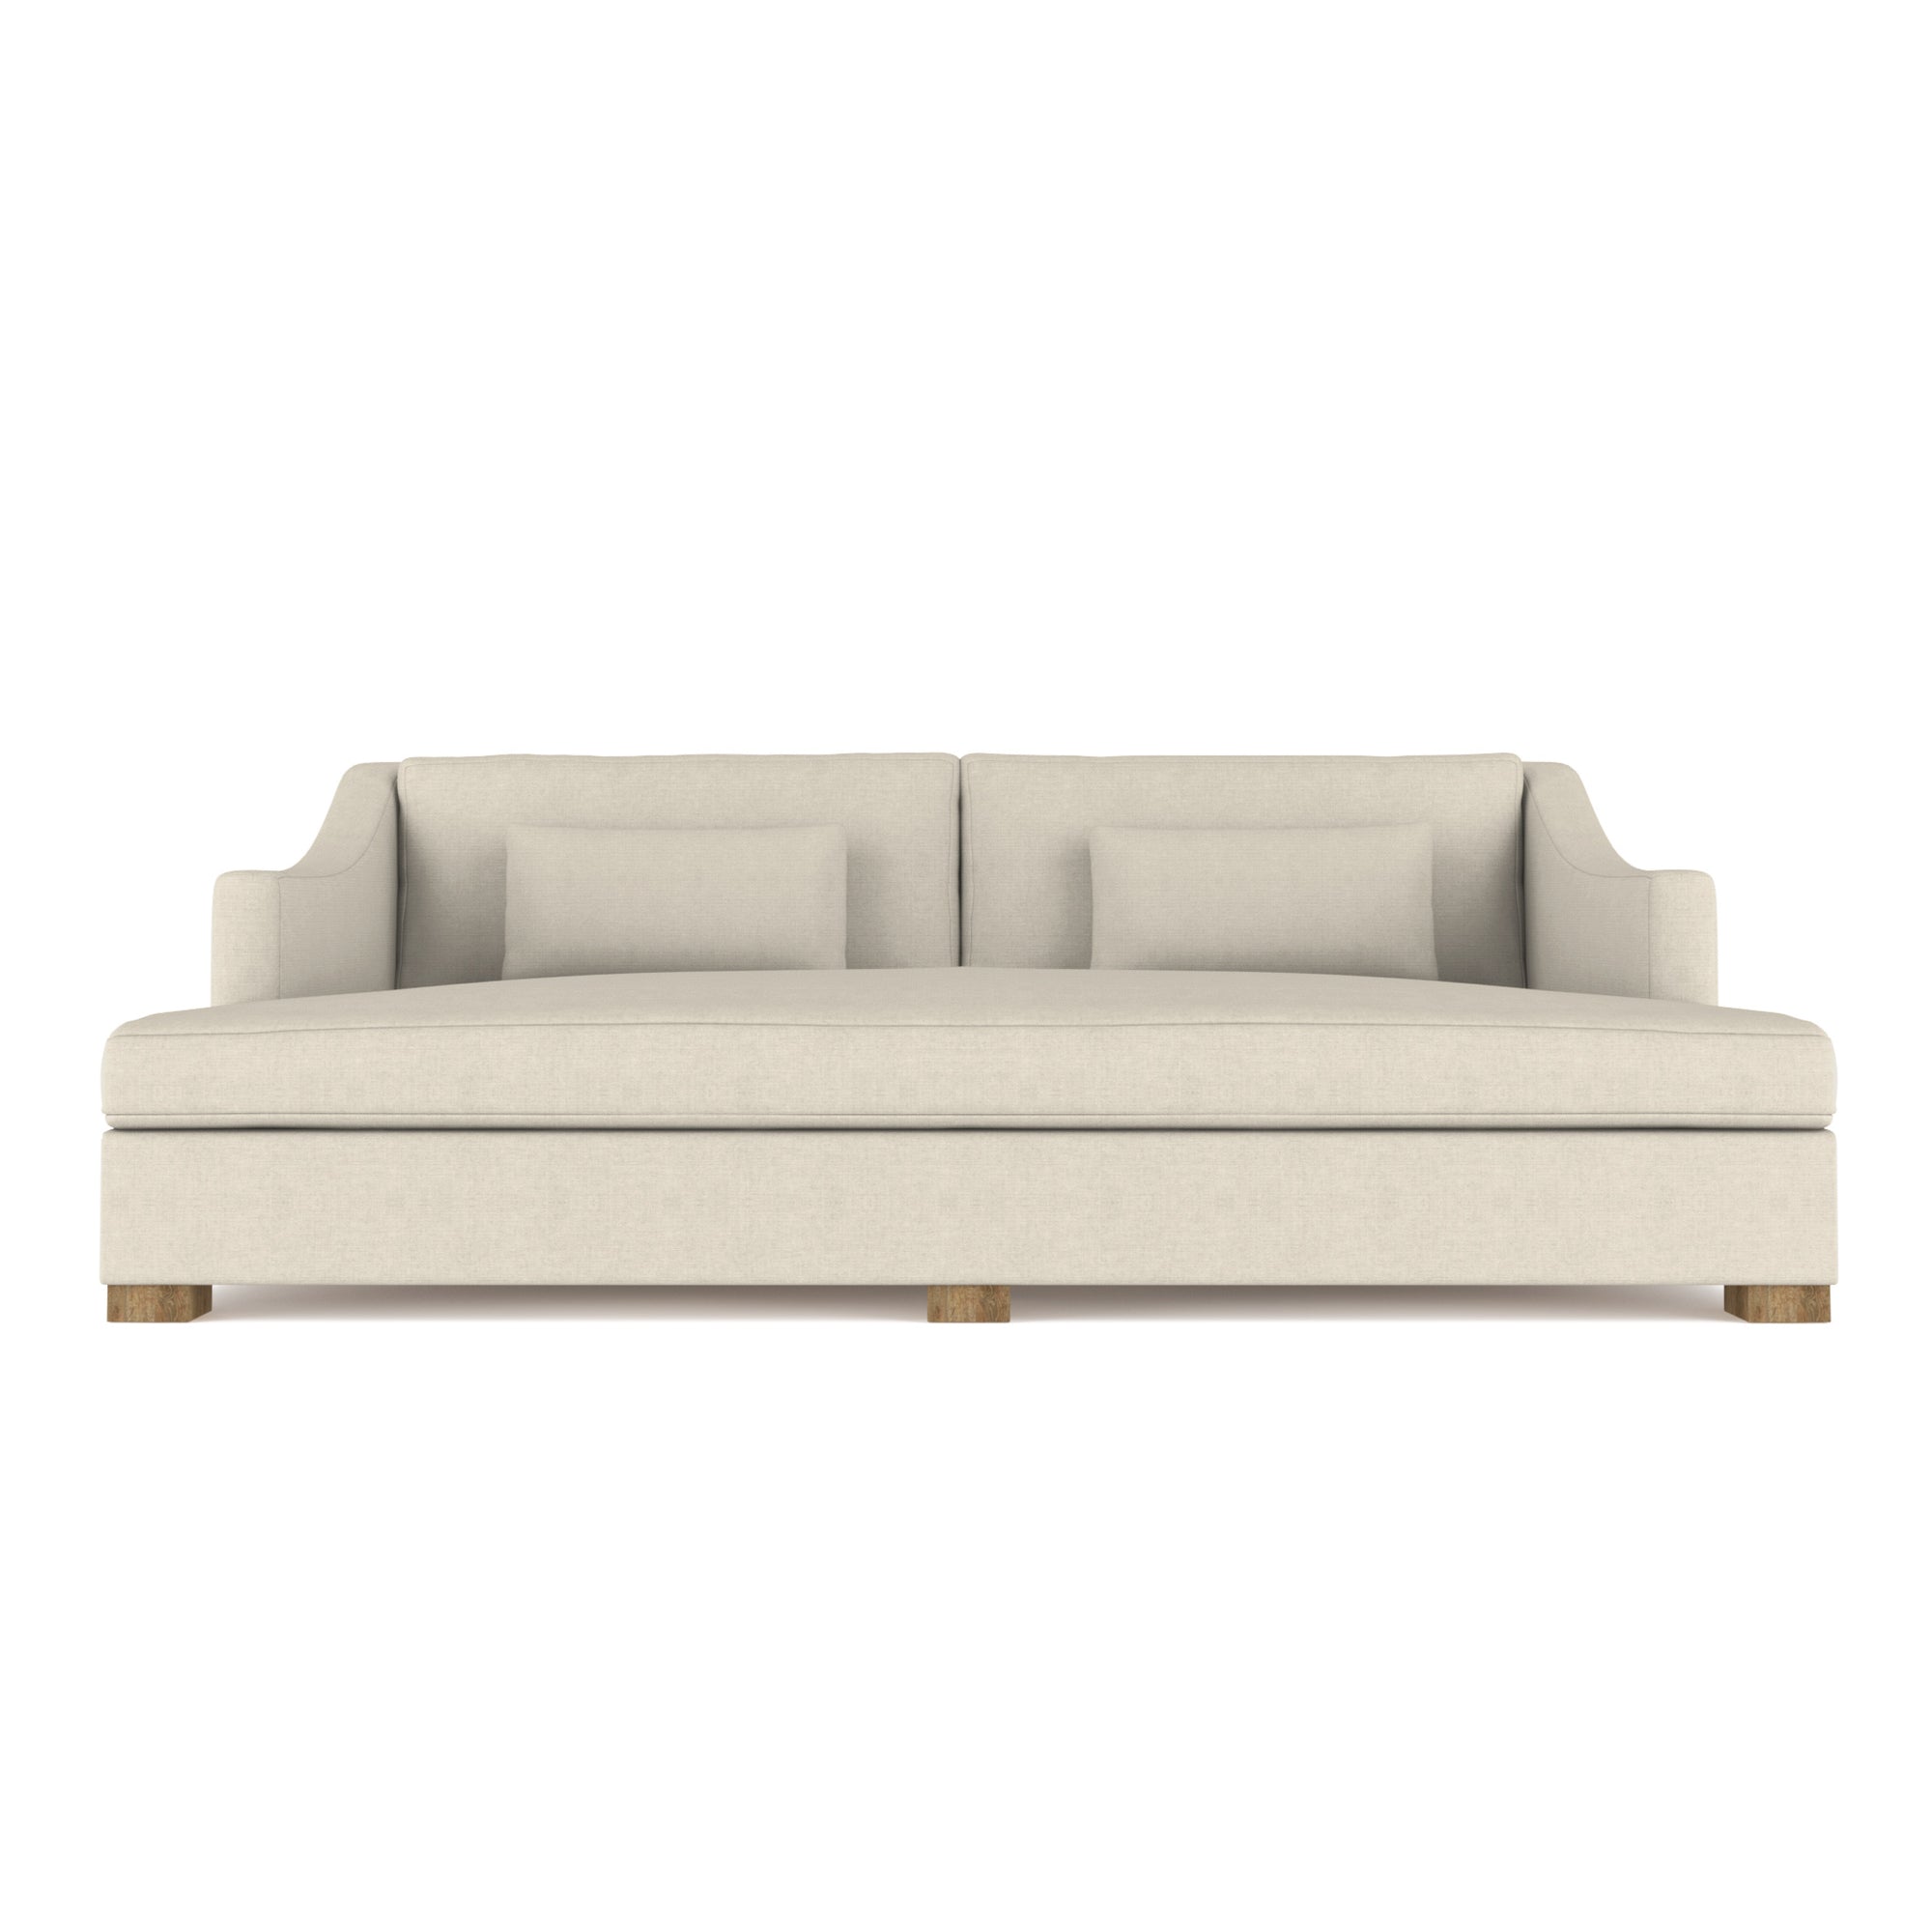 Crosby Daybed - Oyster Box Weave Linen